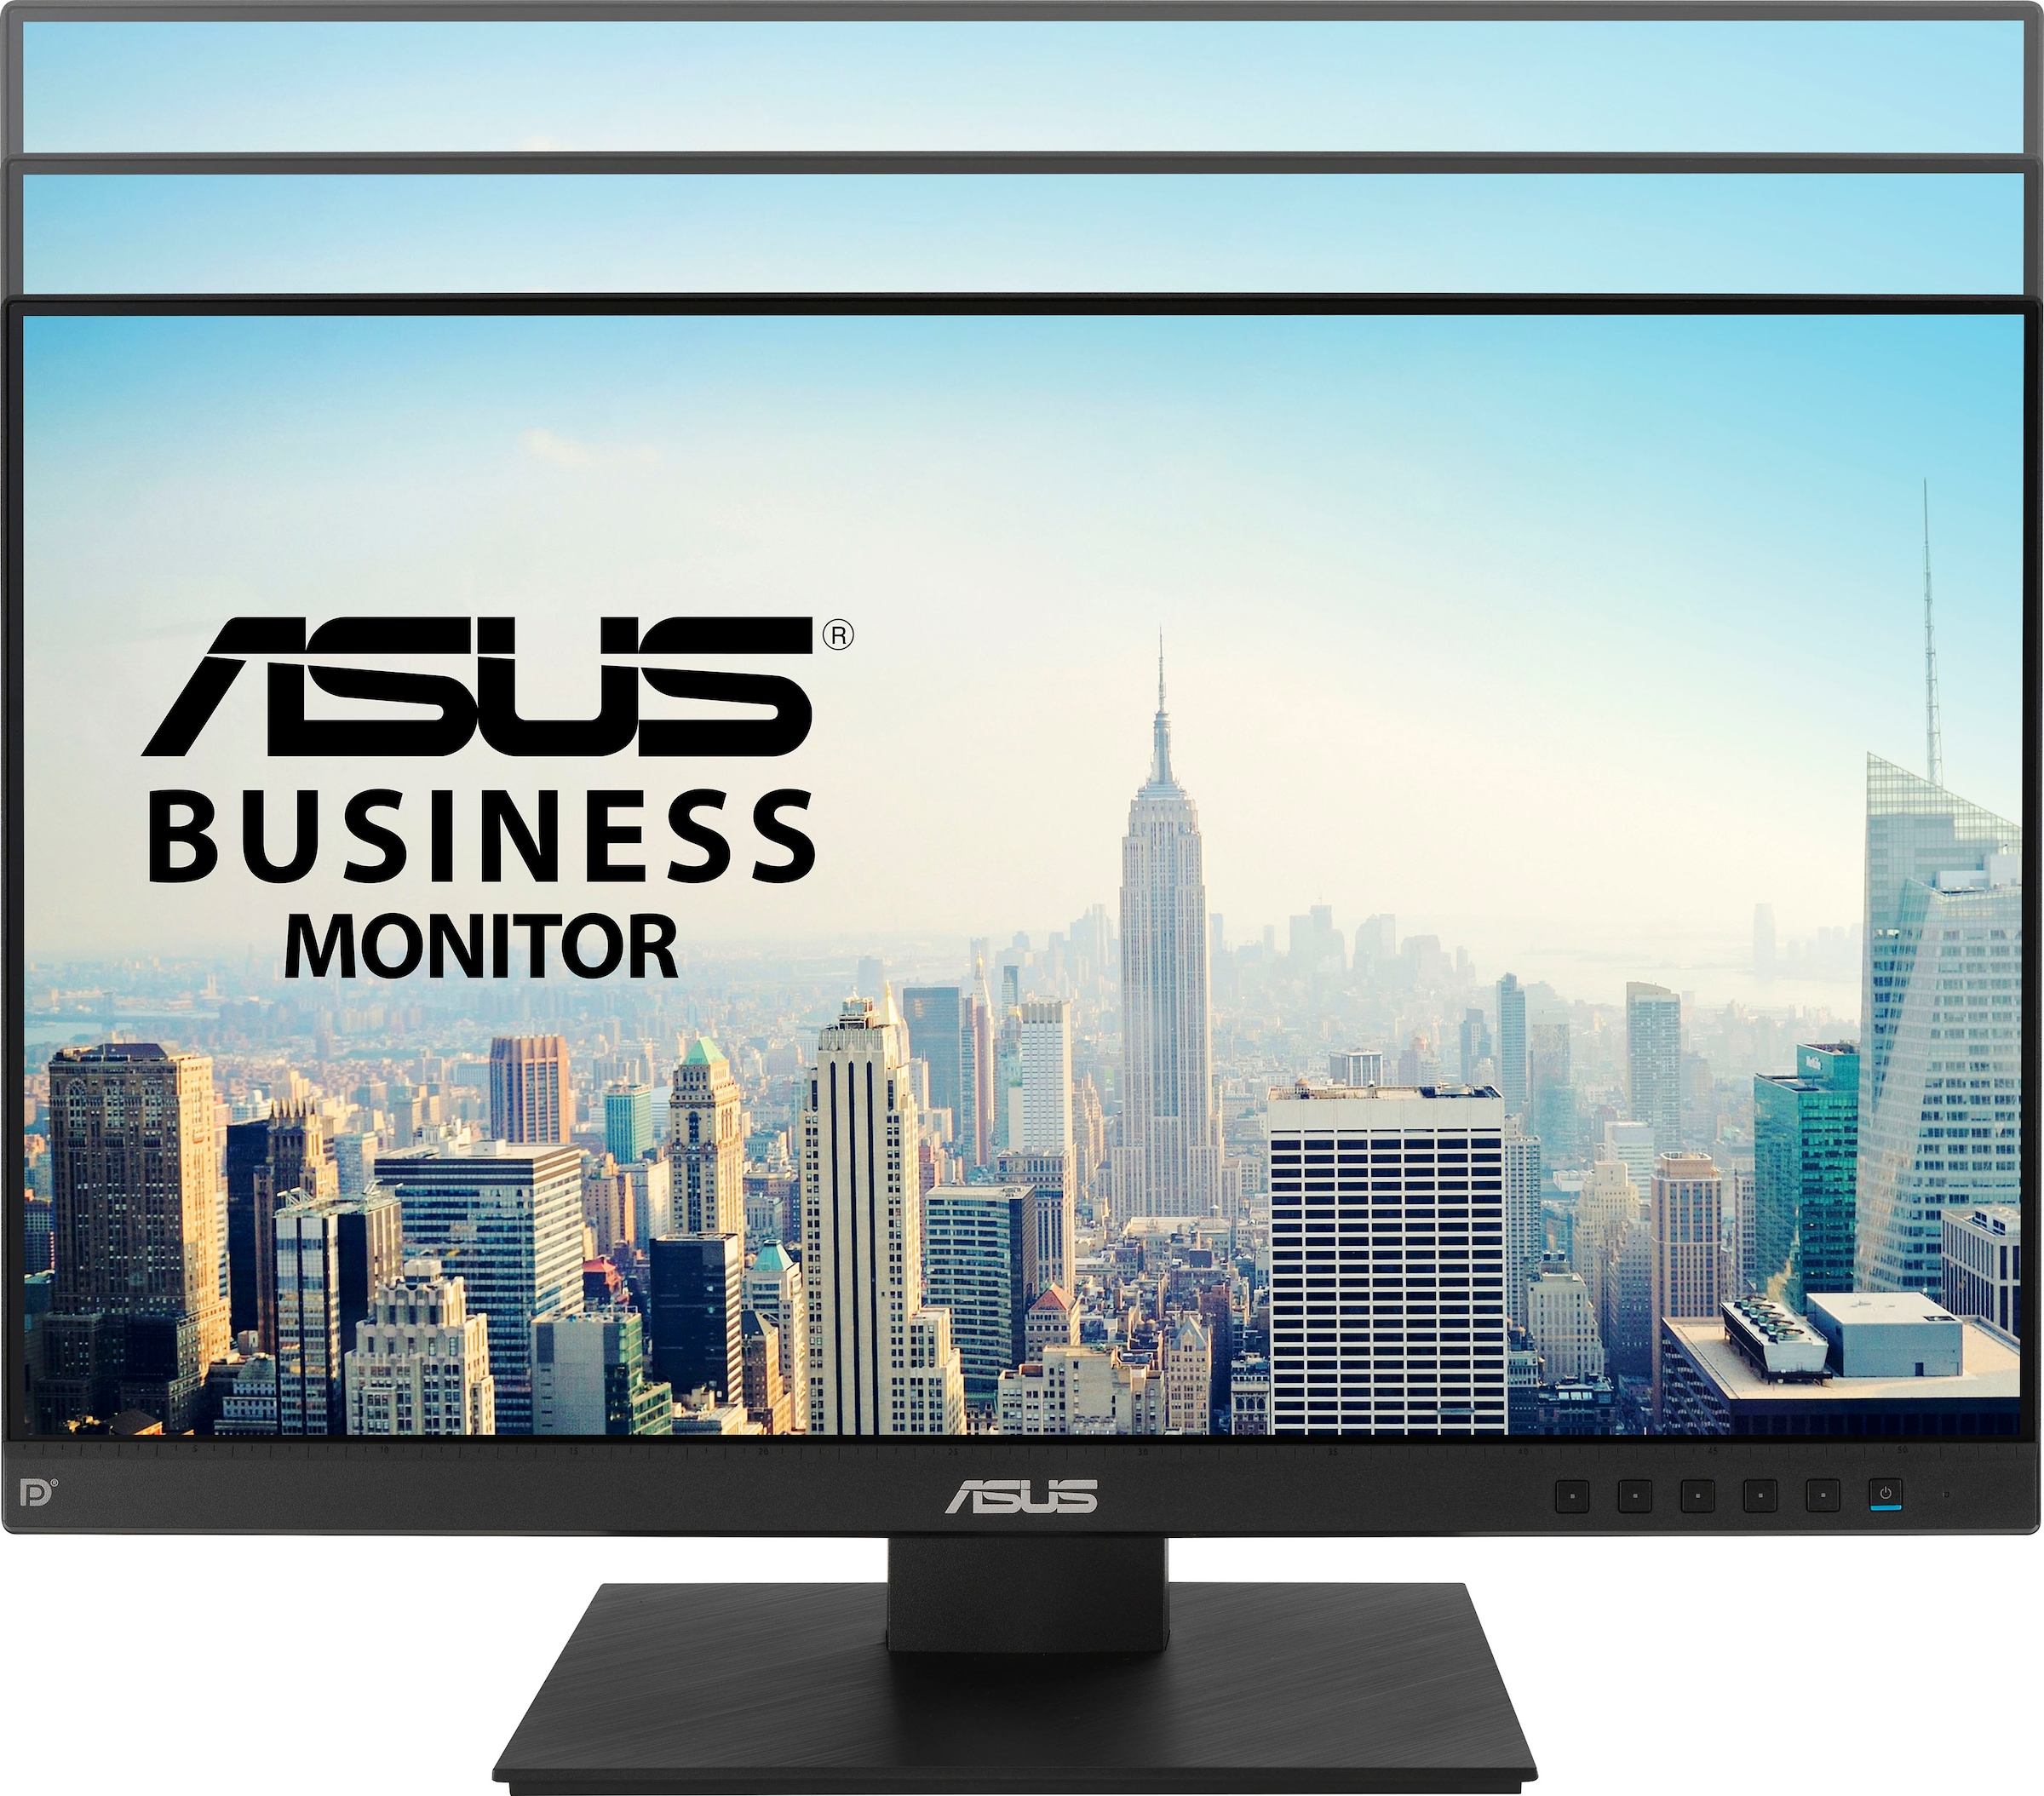 Asus LED-Monitor »BE24EQSB«, 61 cm/24 Zoll, 1920 x 1080 px, Full HD, 5 ms Reaktionszeit, 60 Hz